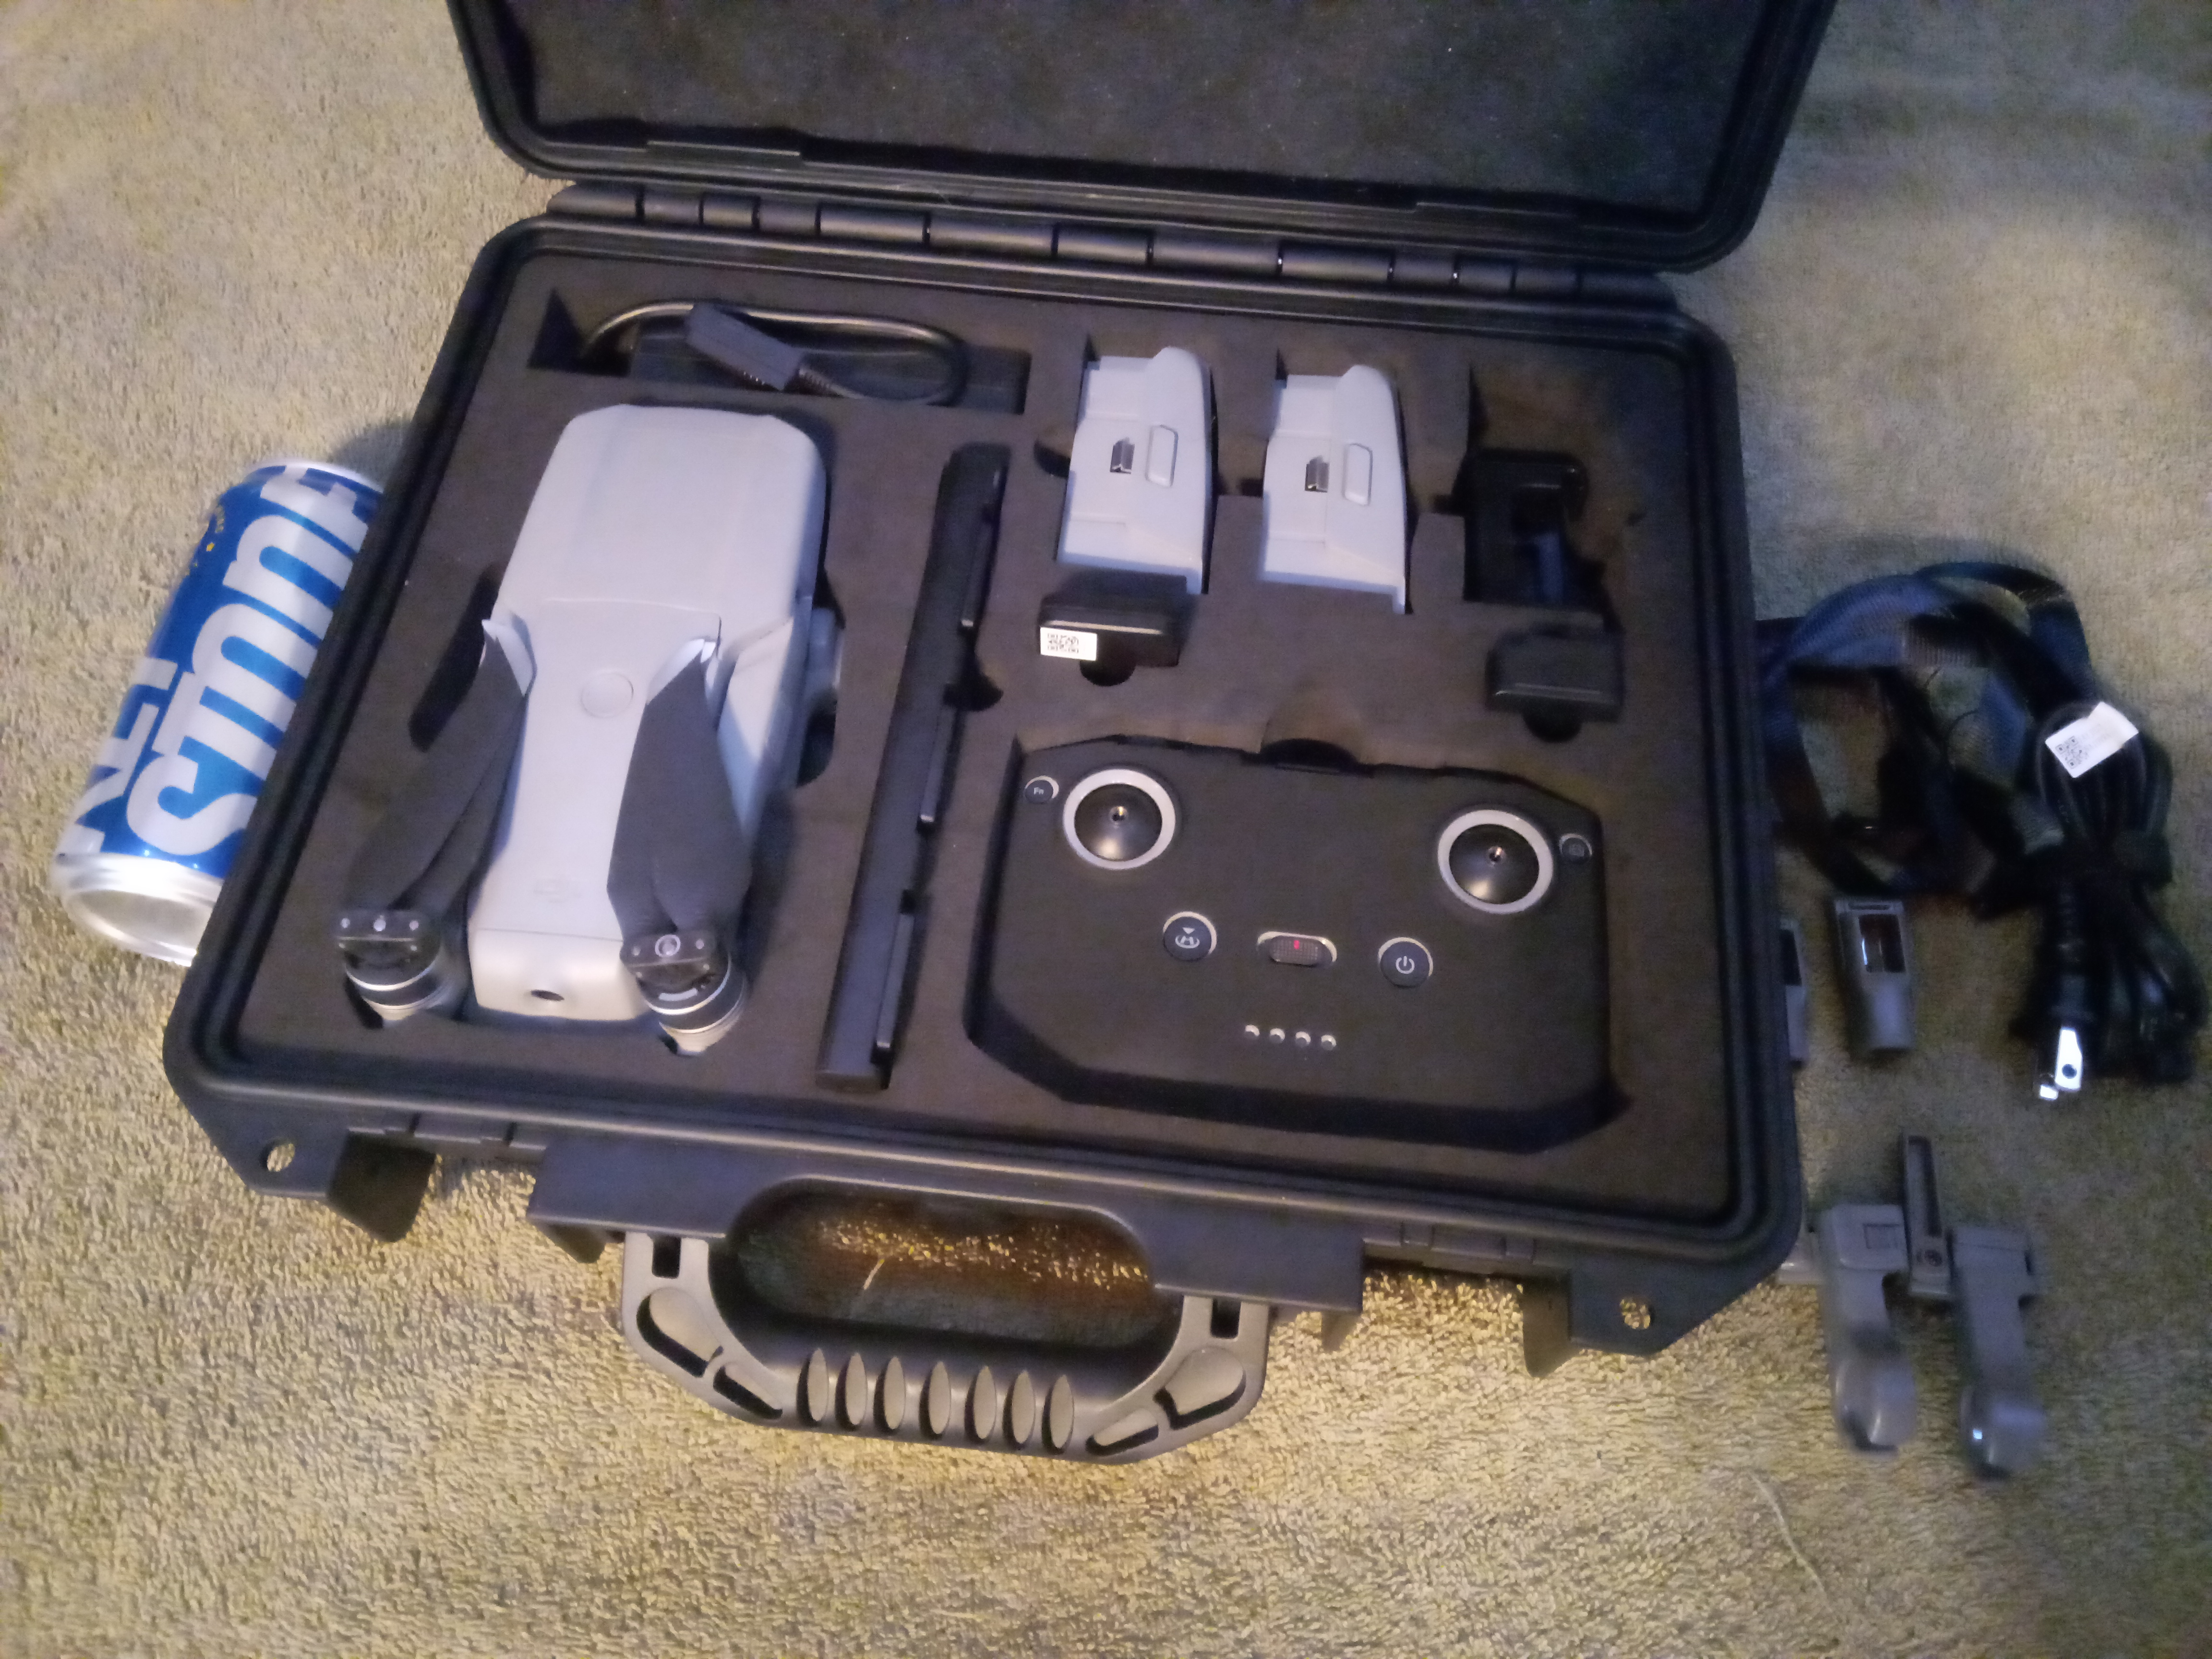 inside $30 case from Amazon